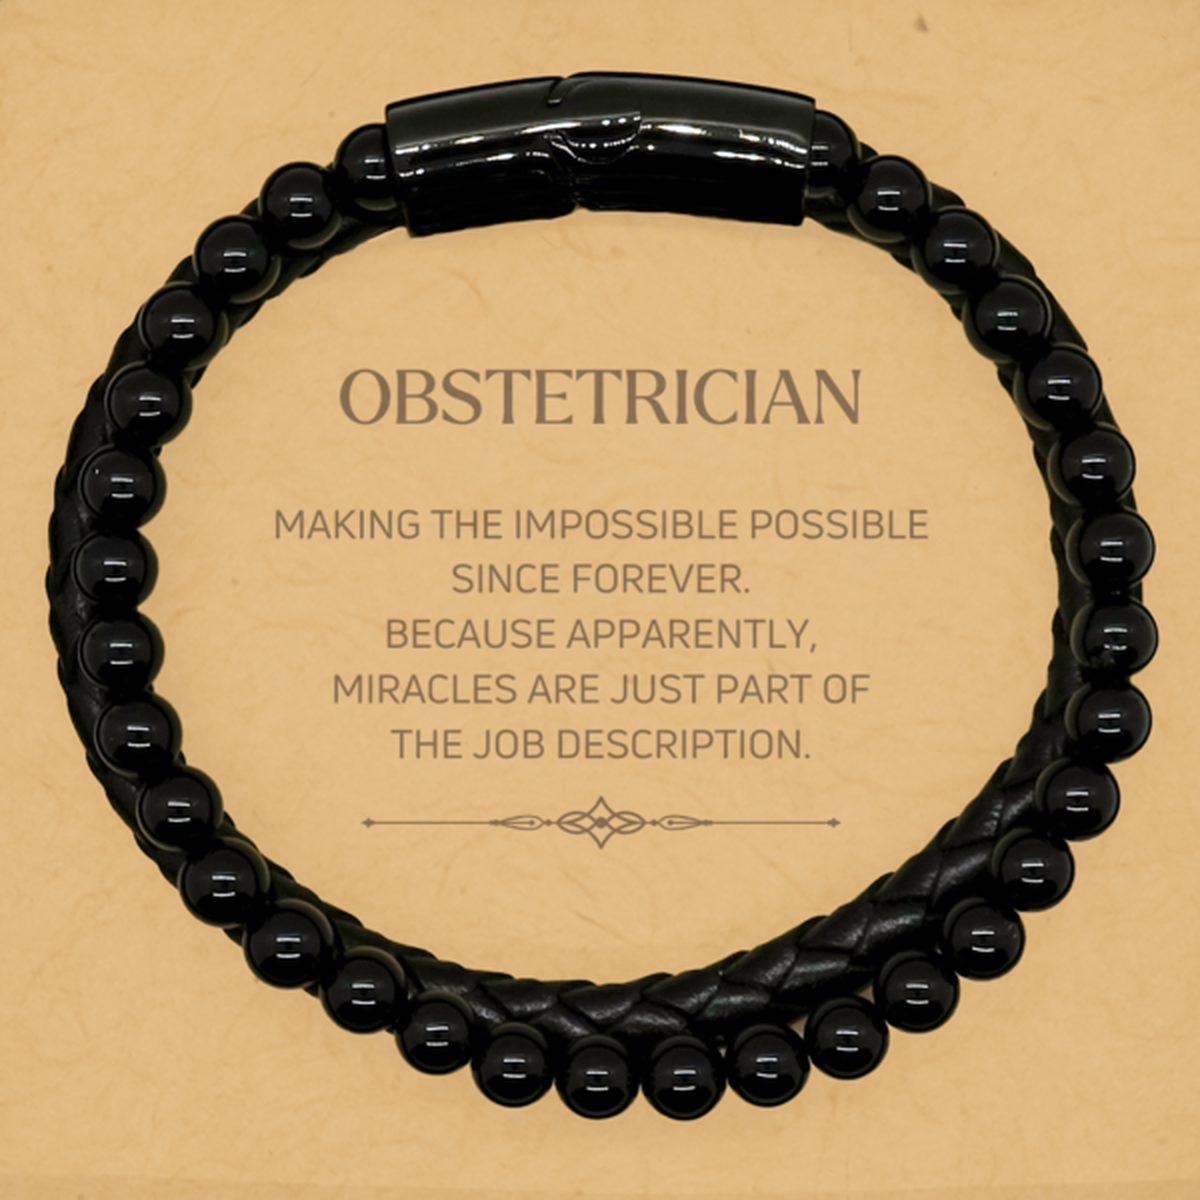 Funny Obstetrician Gifts, Miracles are just part of the job description, Inspirational Birthday Stone Leather Bracelets For Obstetrician, Men, Women, Coworkers, Friends, Boss